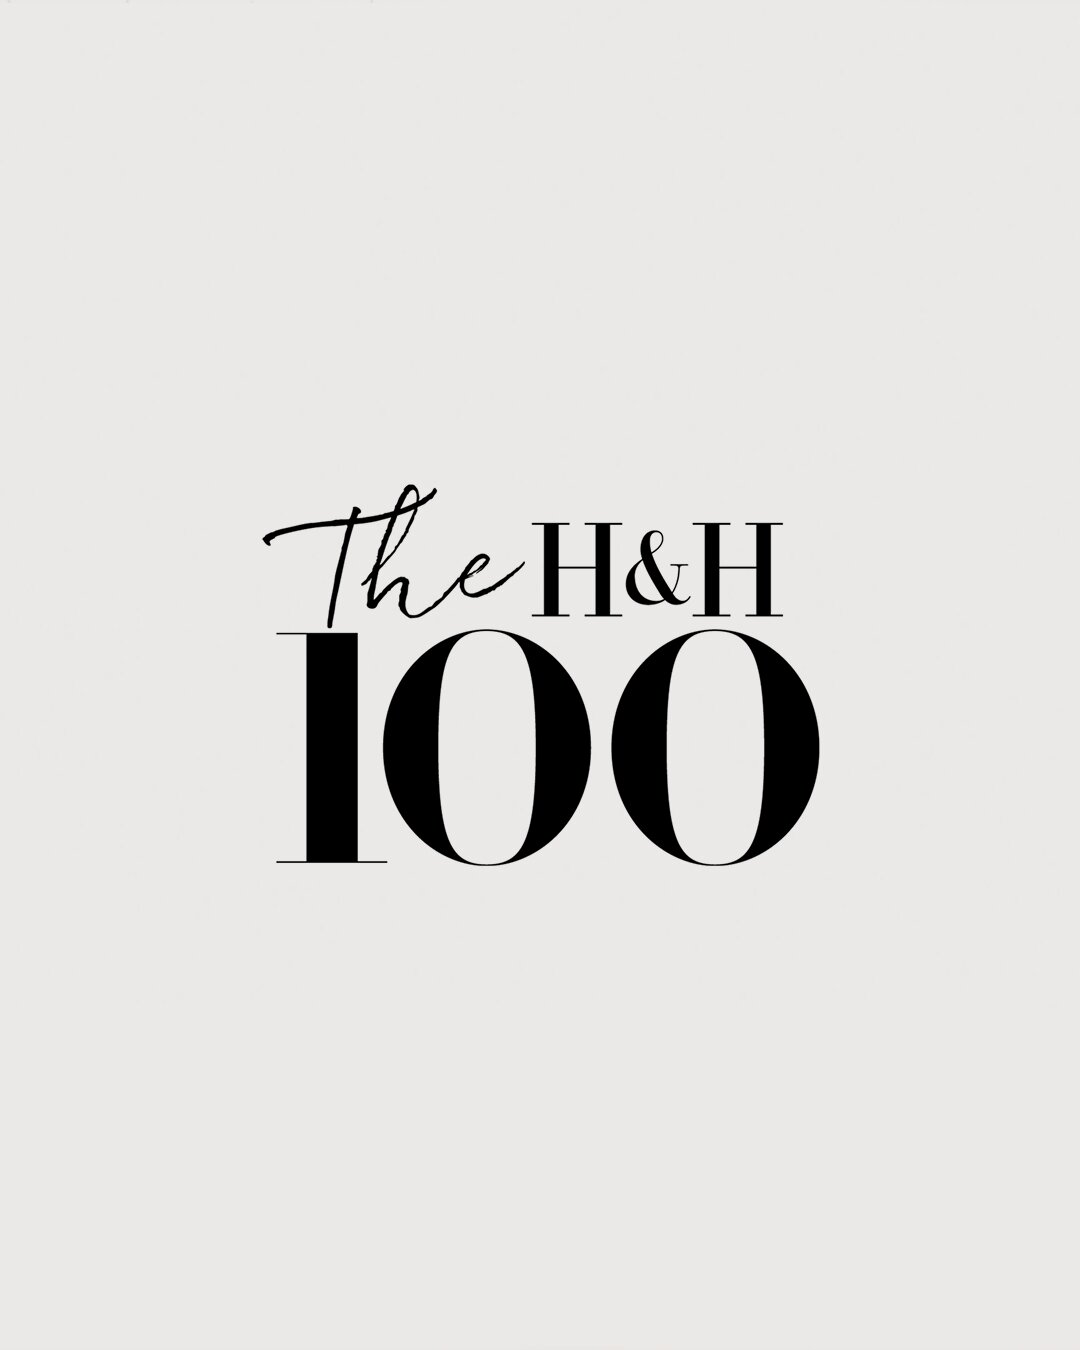 Did you catch us in the #HH100? It's @houseandhomemag's inaugural list of the top Canadian designers captivating them today. 

If you missed it in print, the round up is now available online at the link in our bio &mdash; check it out to explore the 